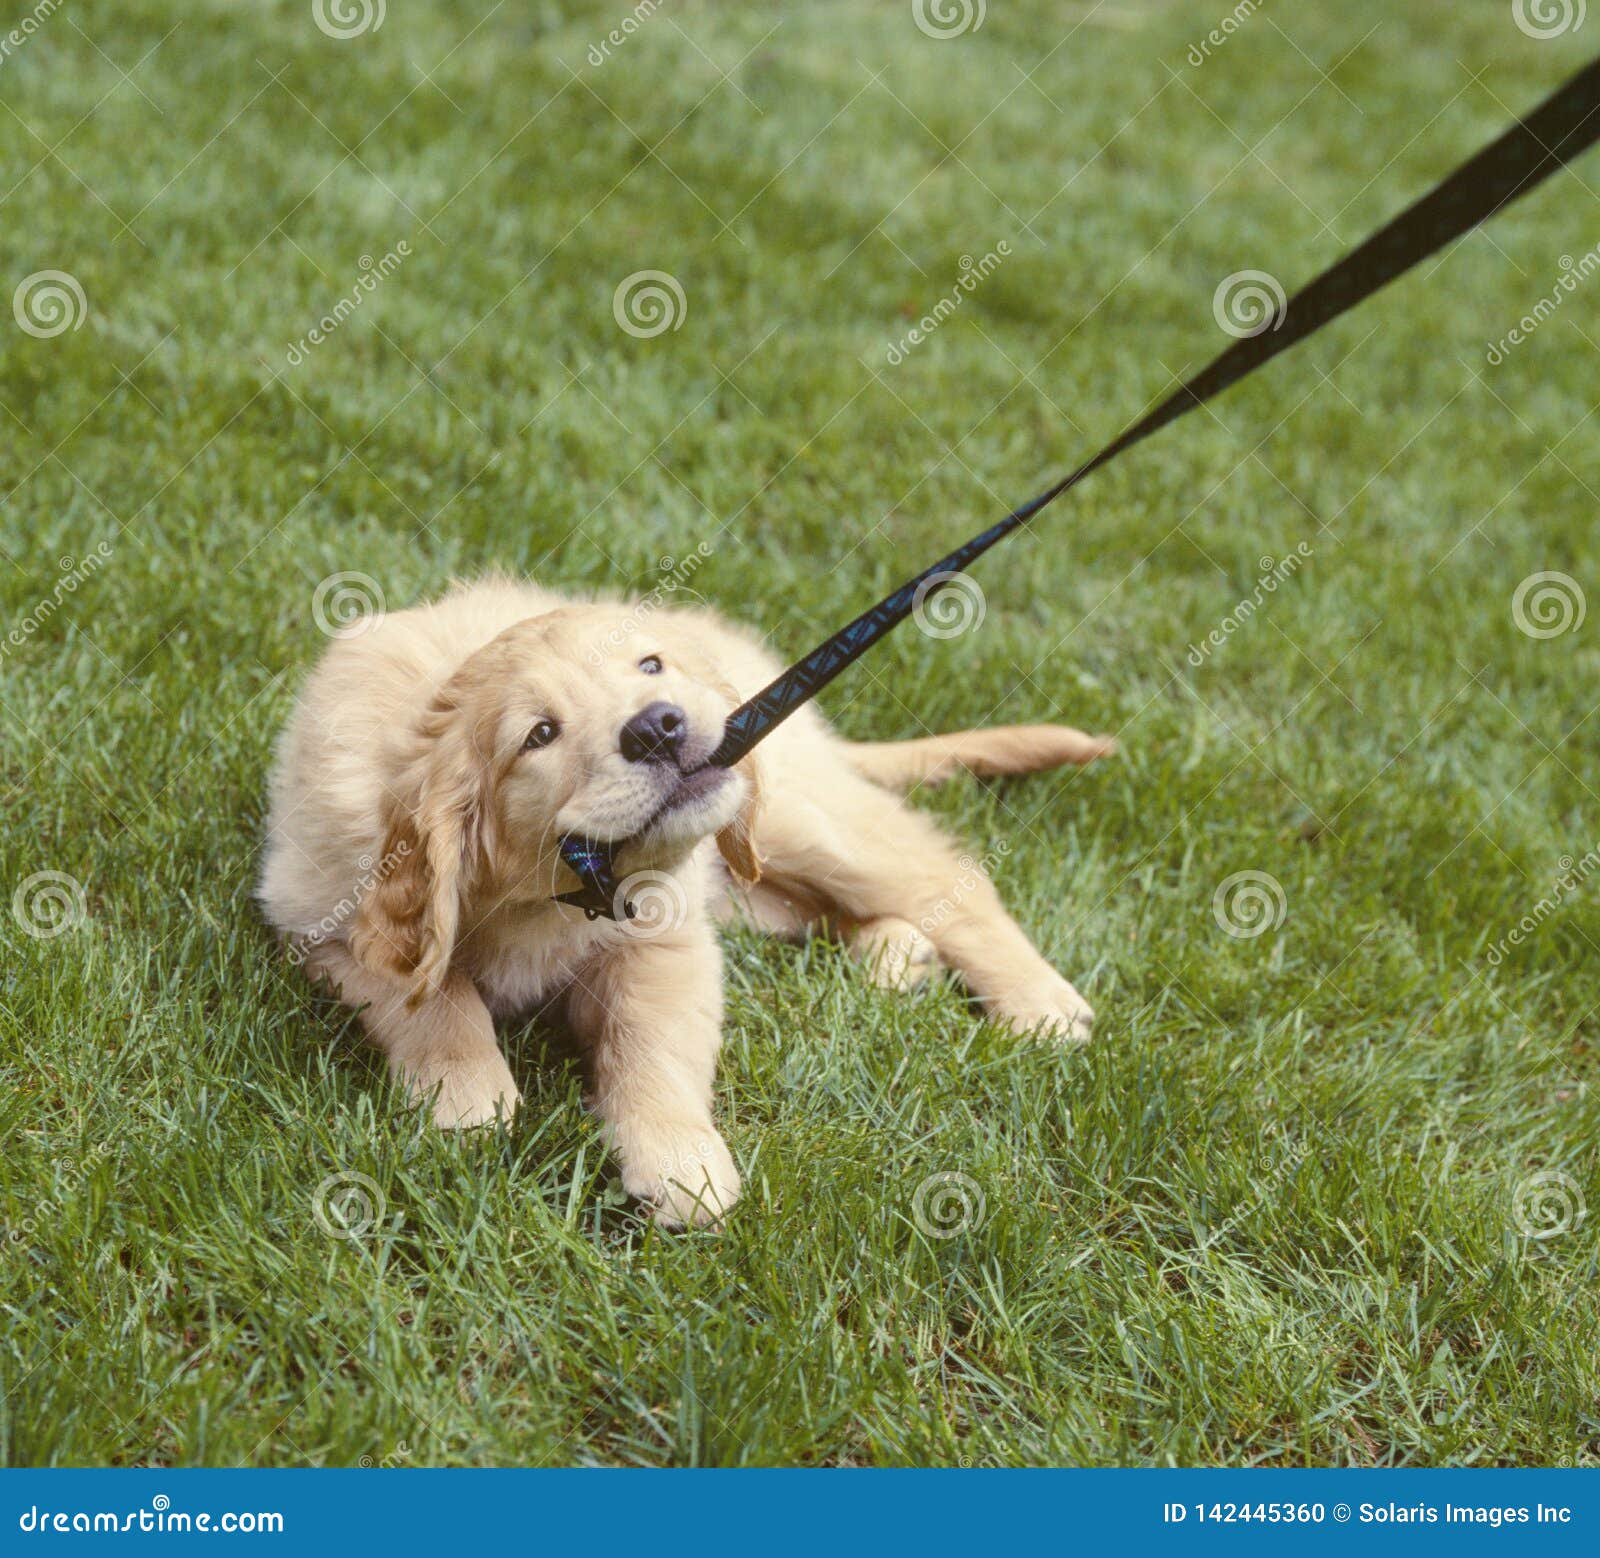 Puppy Dog Chewing Pulling Leash Bad Pet Behavior Animal Obedience Training Stock Photo Image Of Canines Puppy 142445360